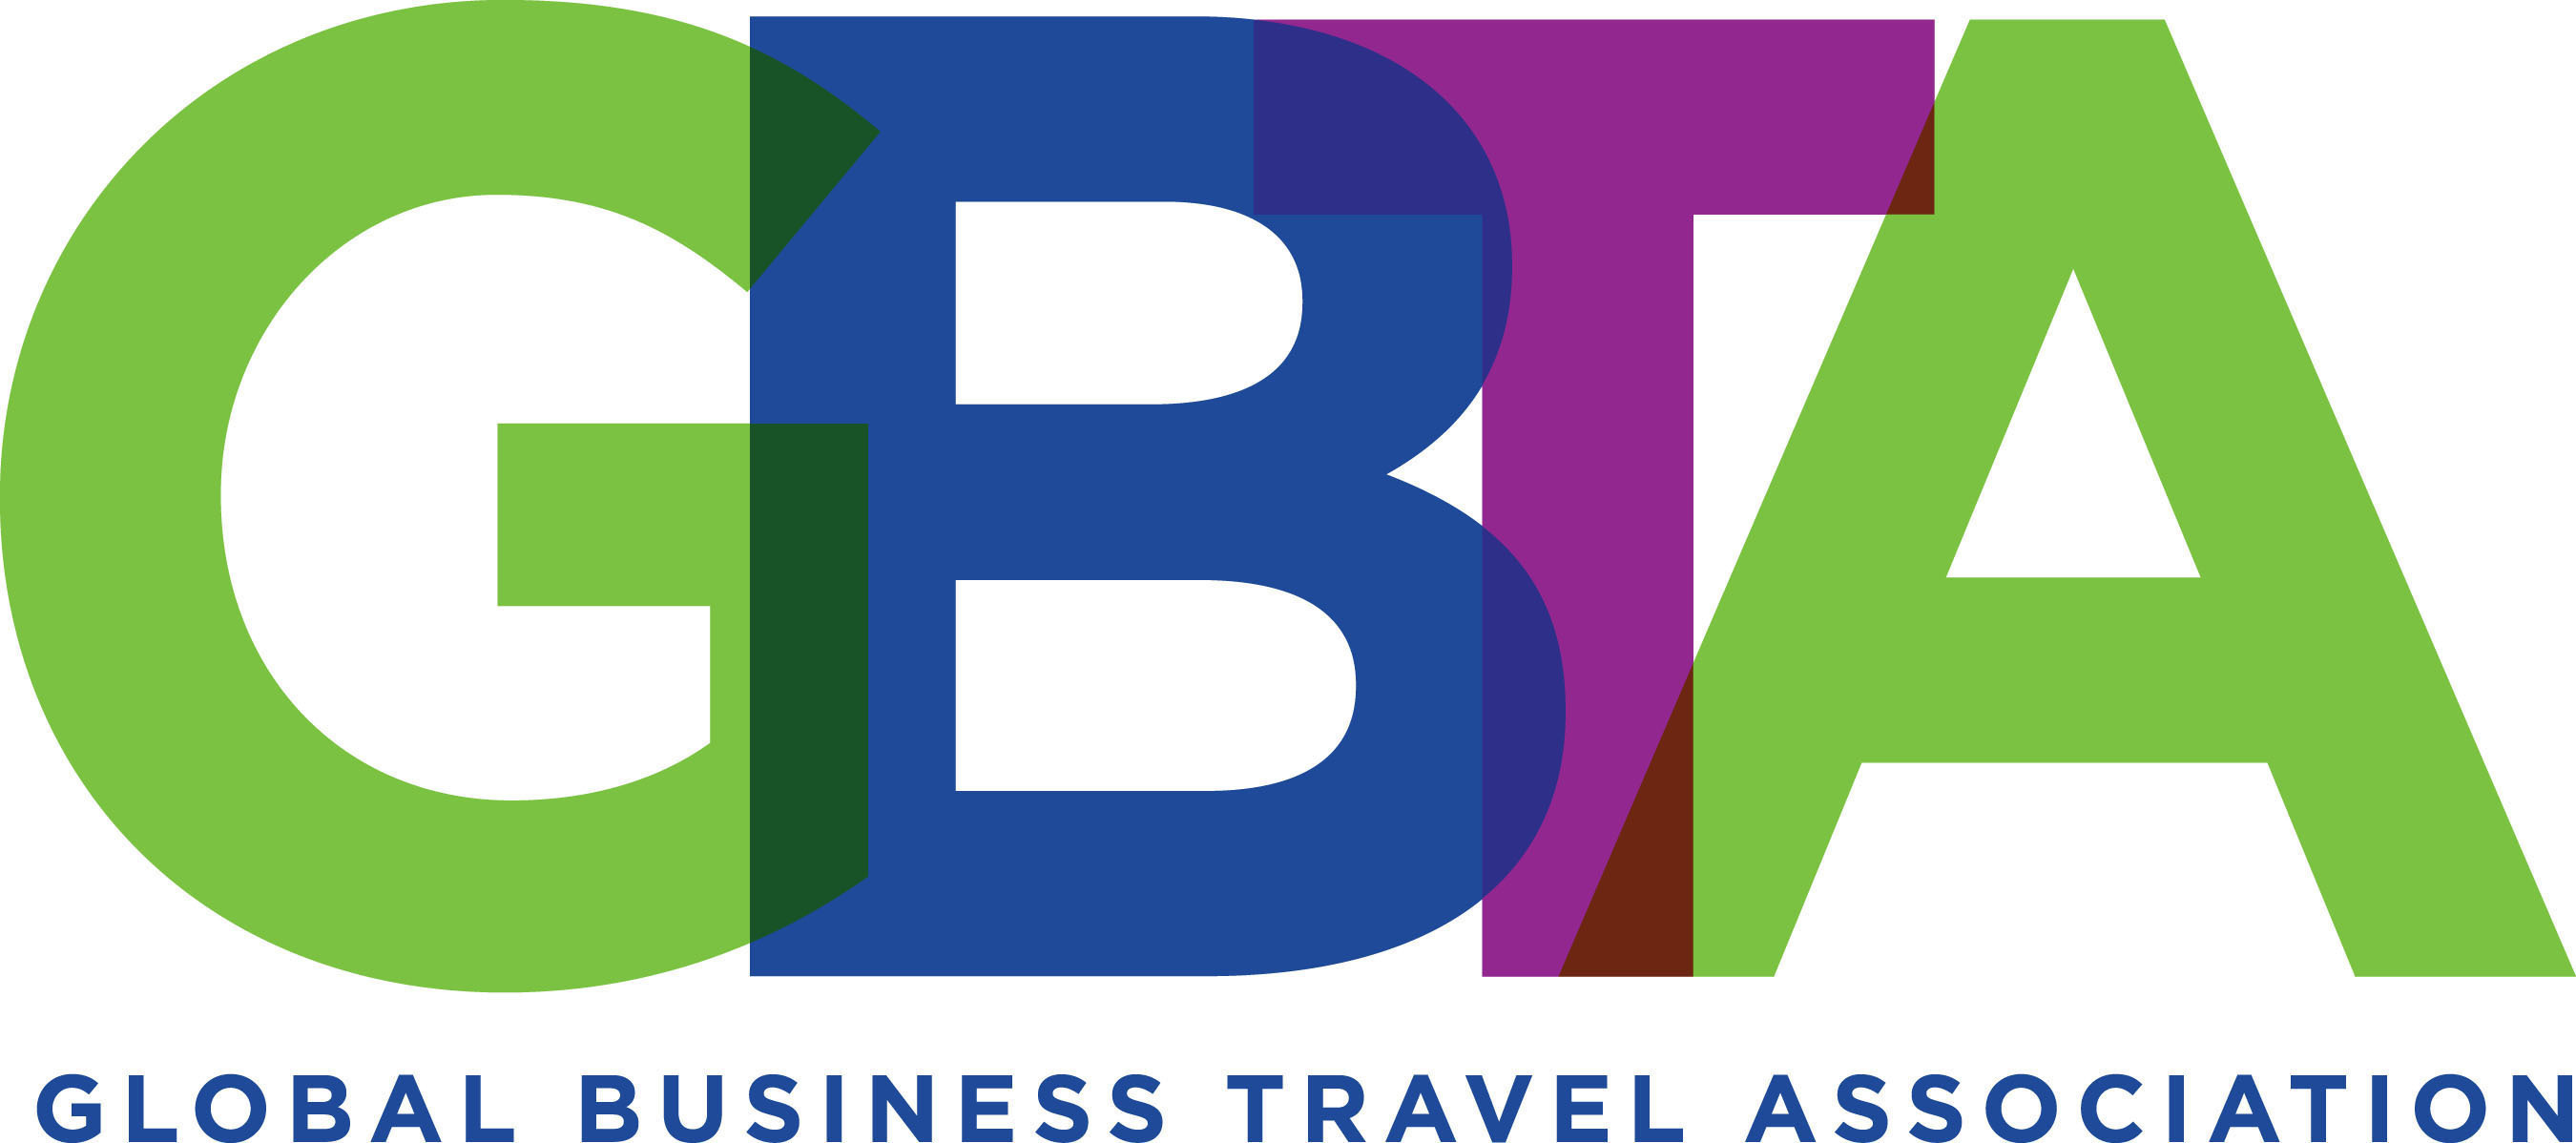 The Global Business Travel Association